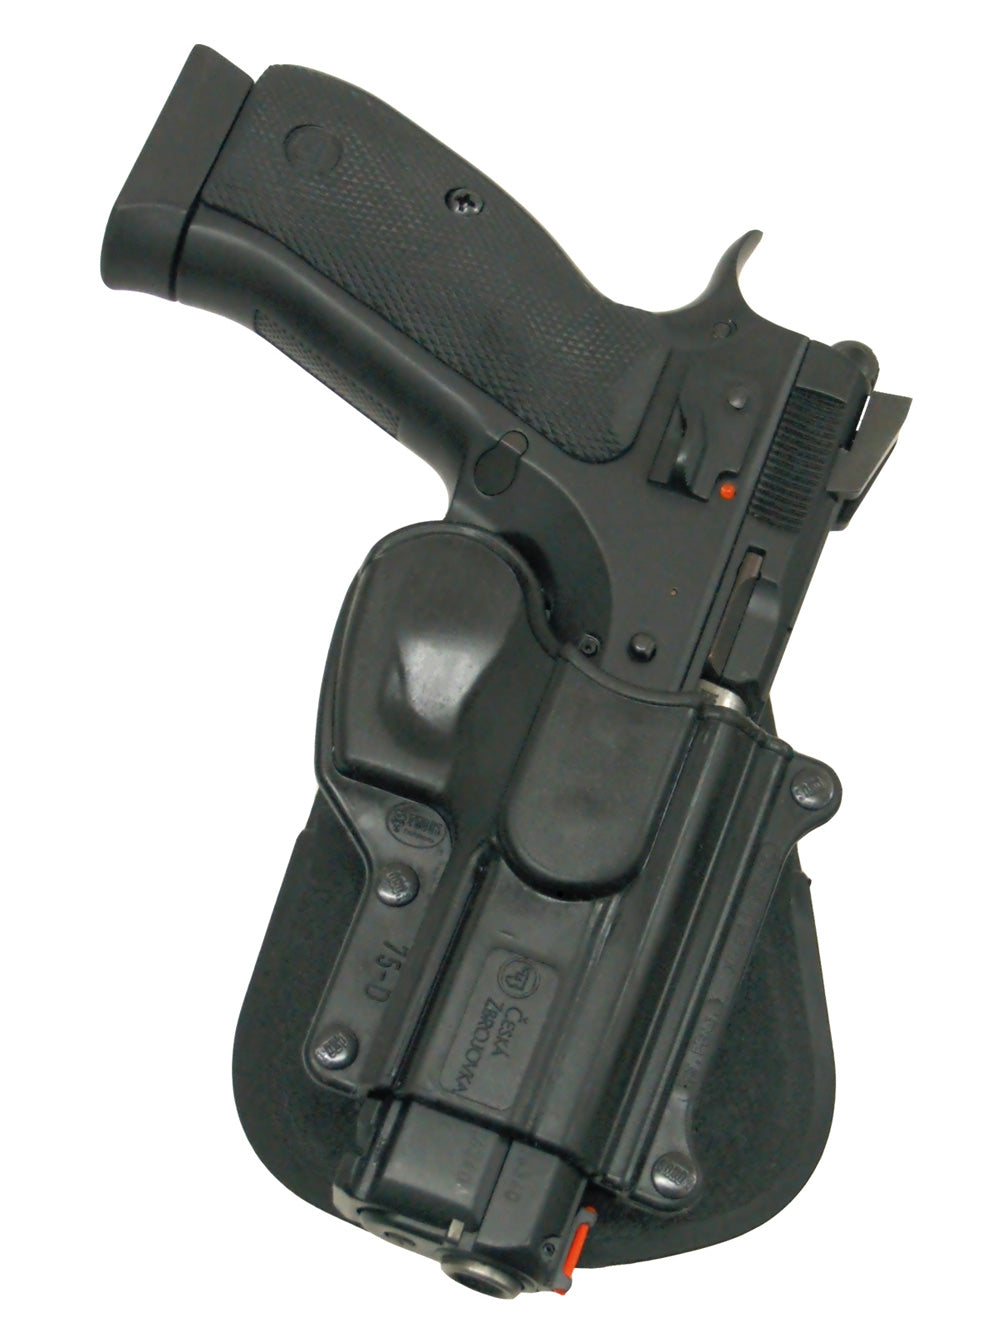 Fobus cz 75d paddle holster